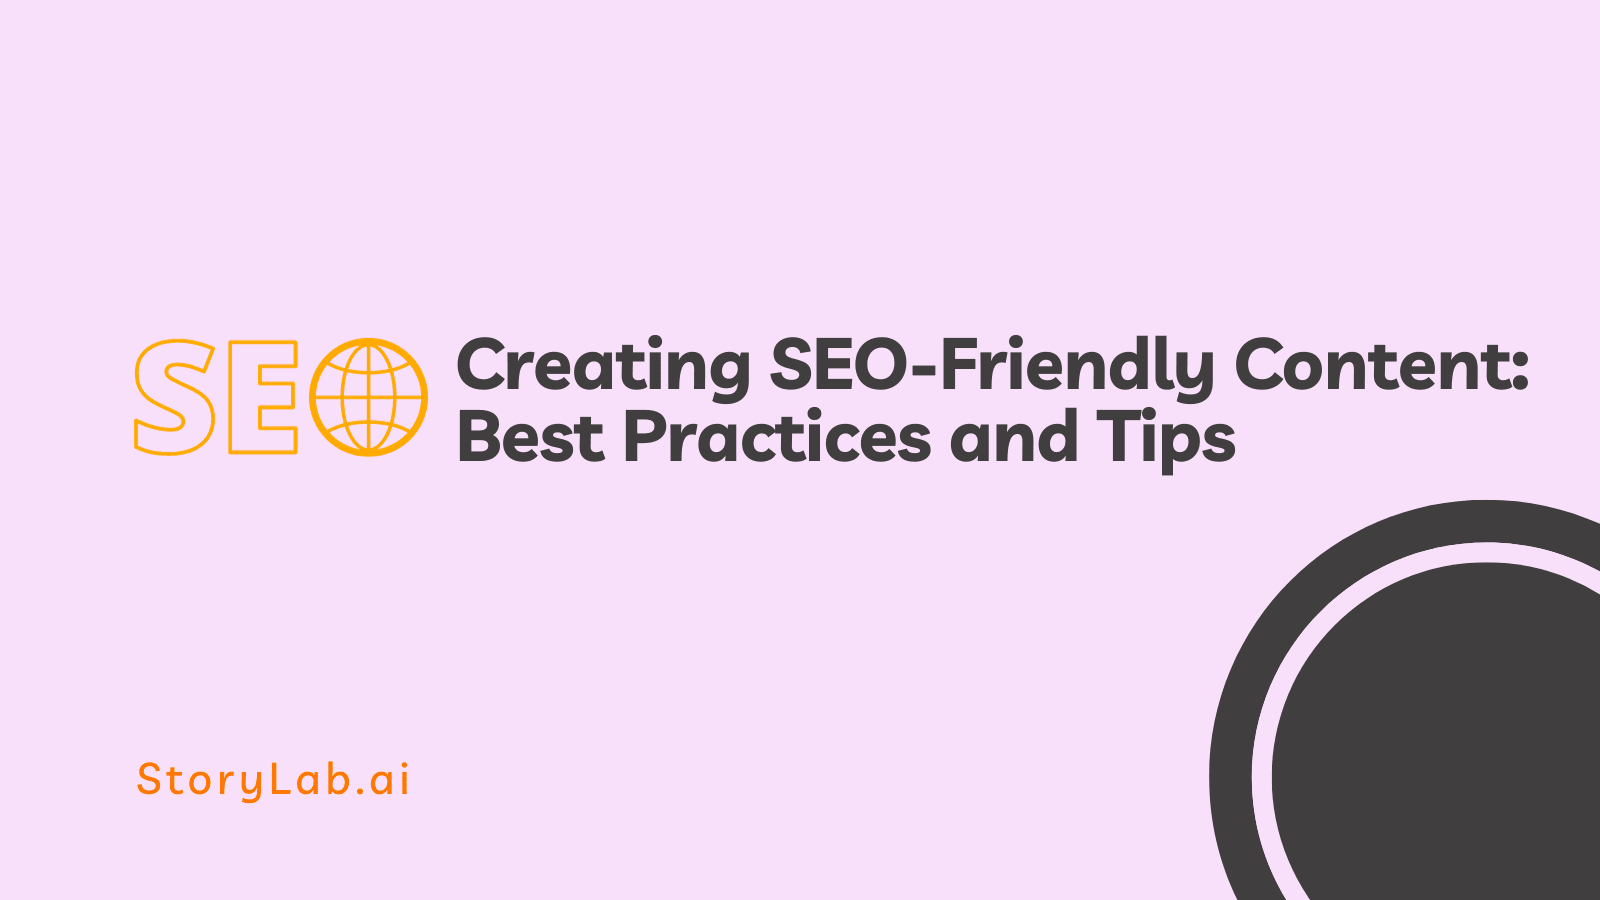 Creating SEO-Friendly Content Best Practices and Tips